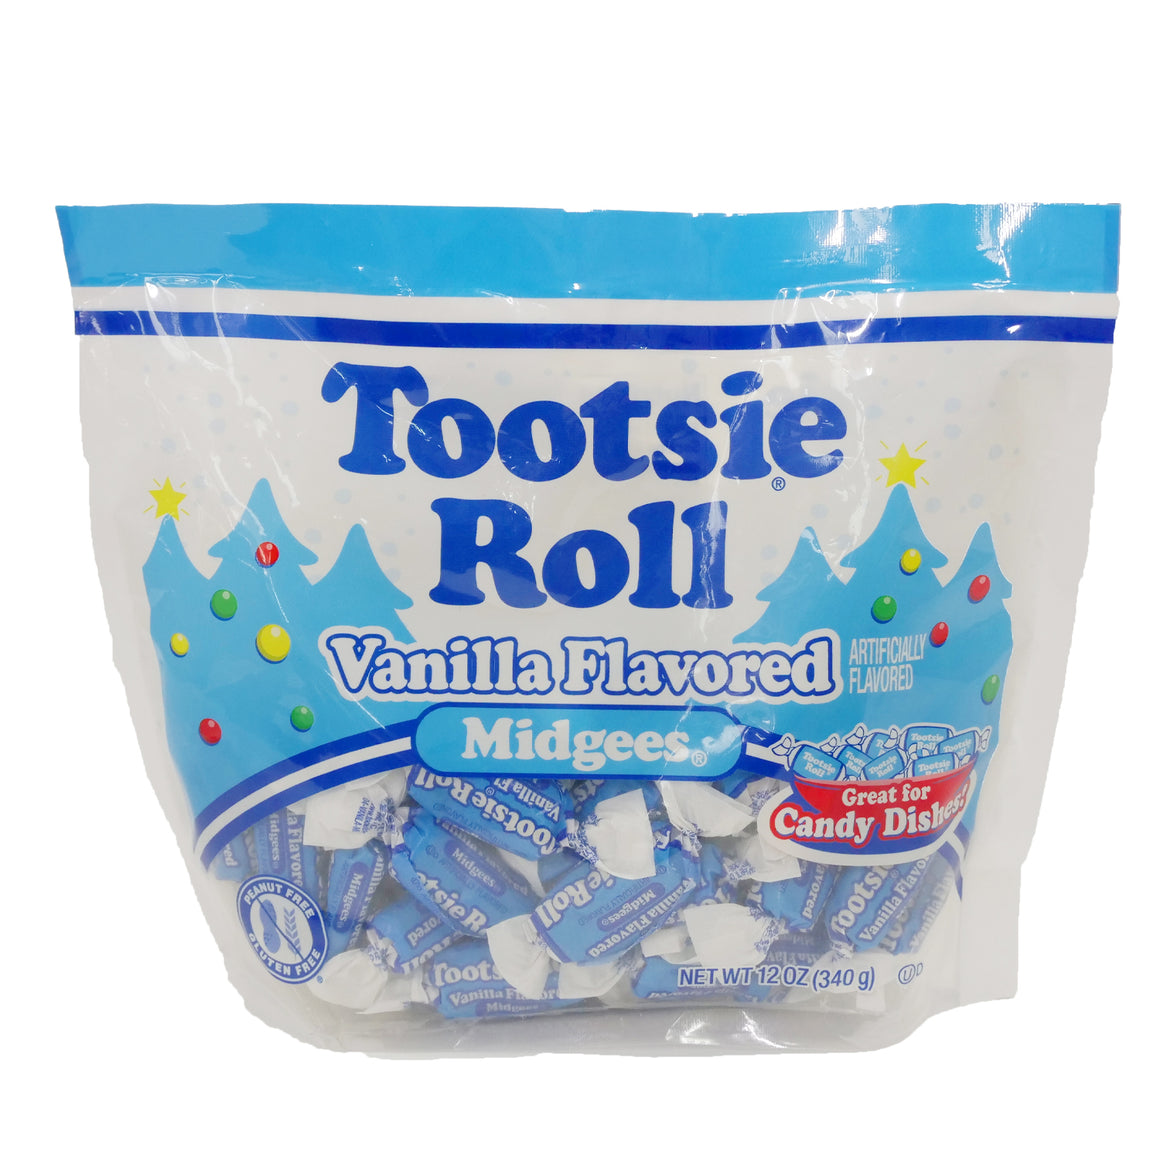 All City Candy Christmas Vanilla Flavored Tootsie Roll Midgees 12 oz. Bag Christmas Tootsie Roll Industries For fresh candy and great service, visit www.allcitycandy.com